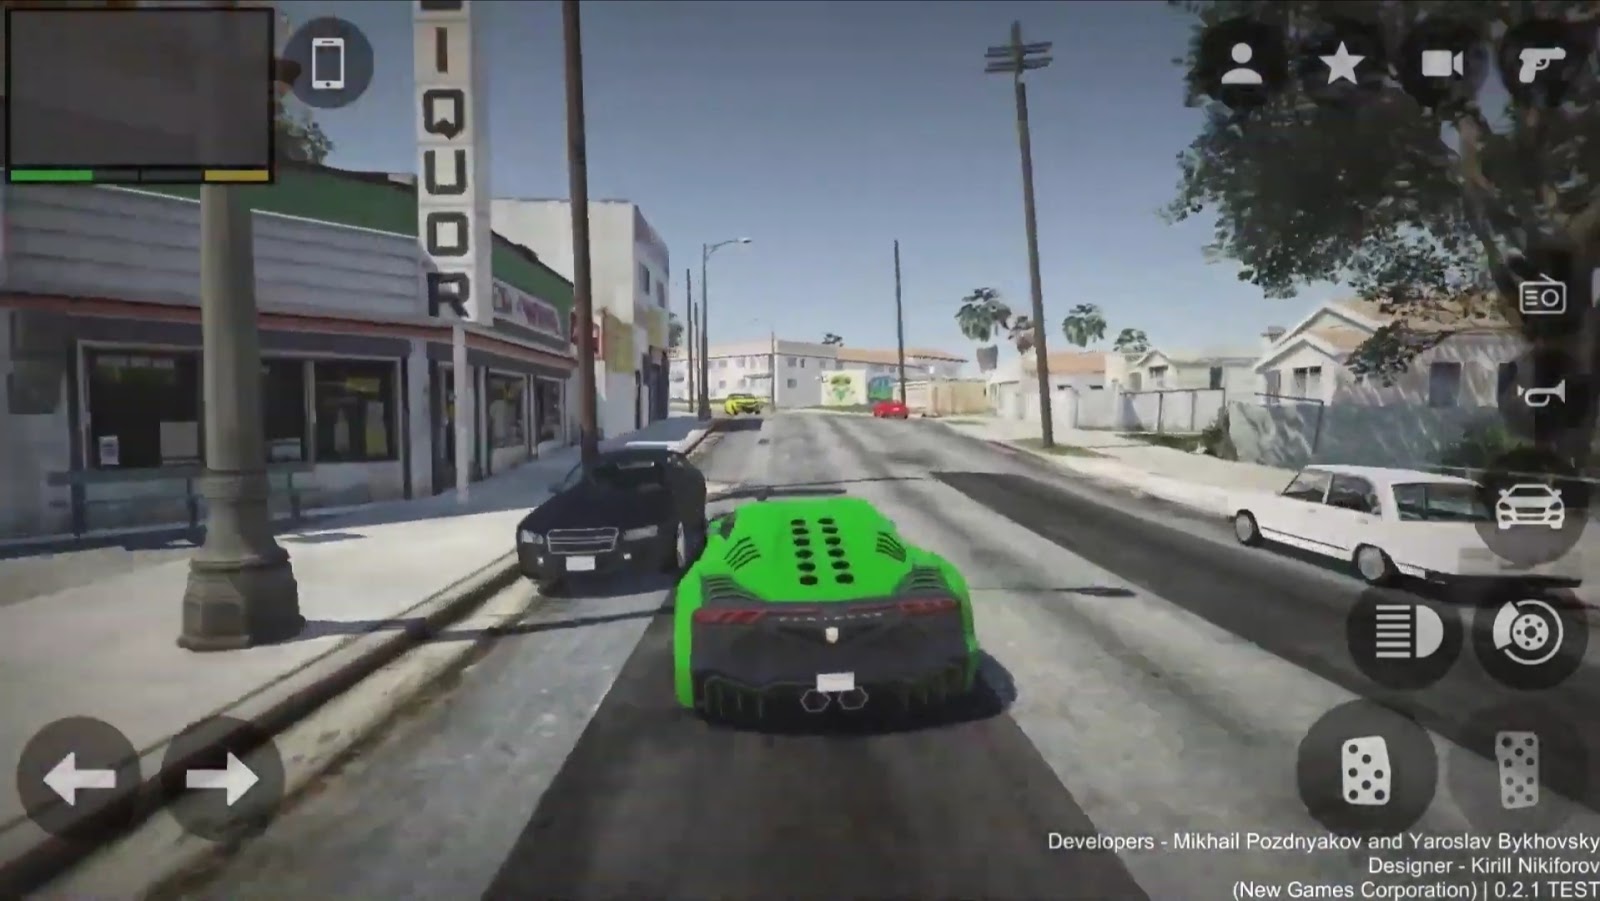 gta 5 highly compressed 19 mb